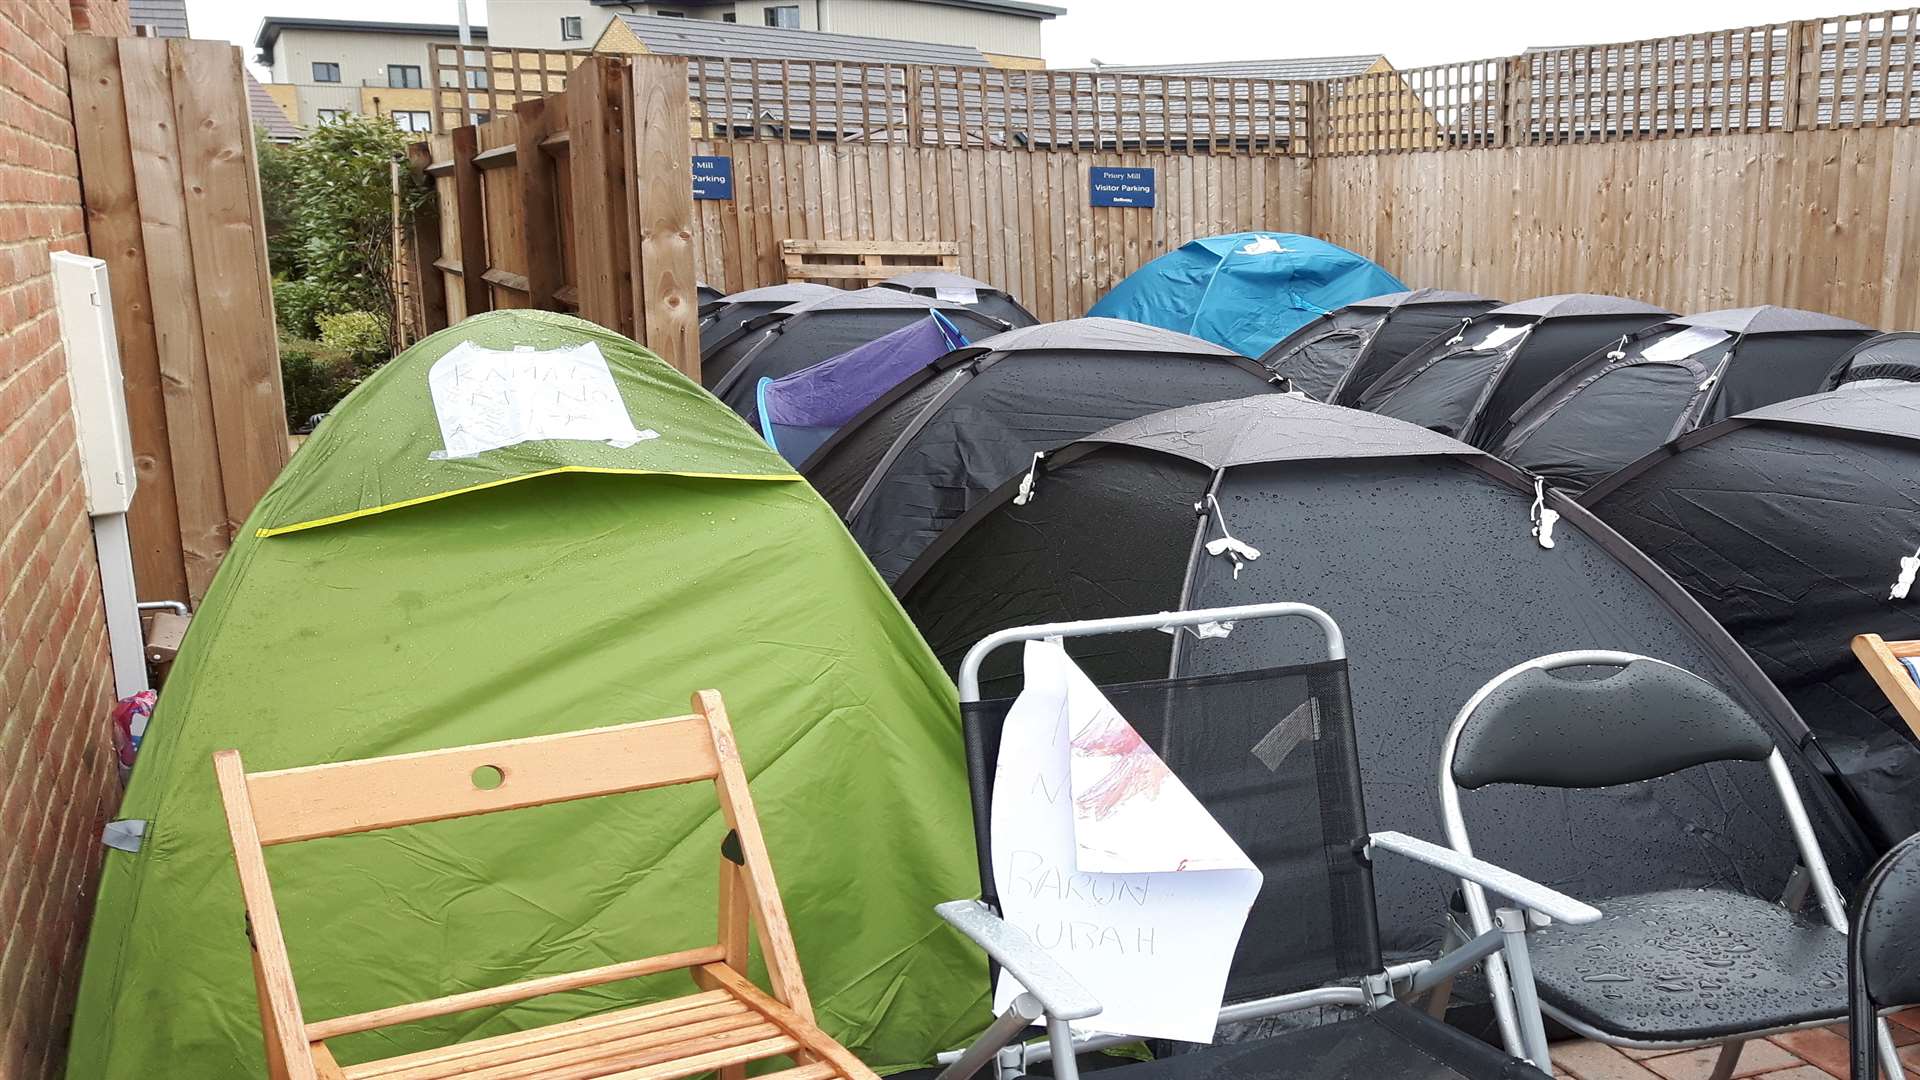 Tents were snapped up from the local Argos